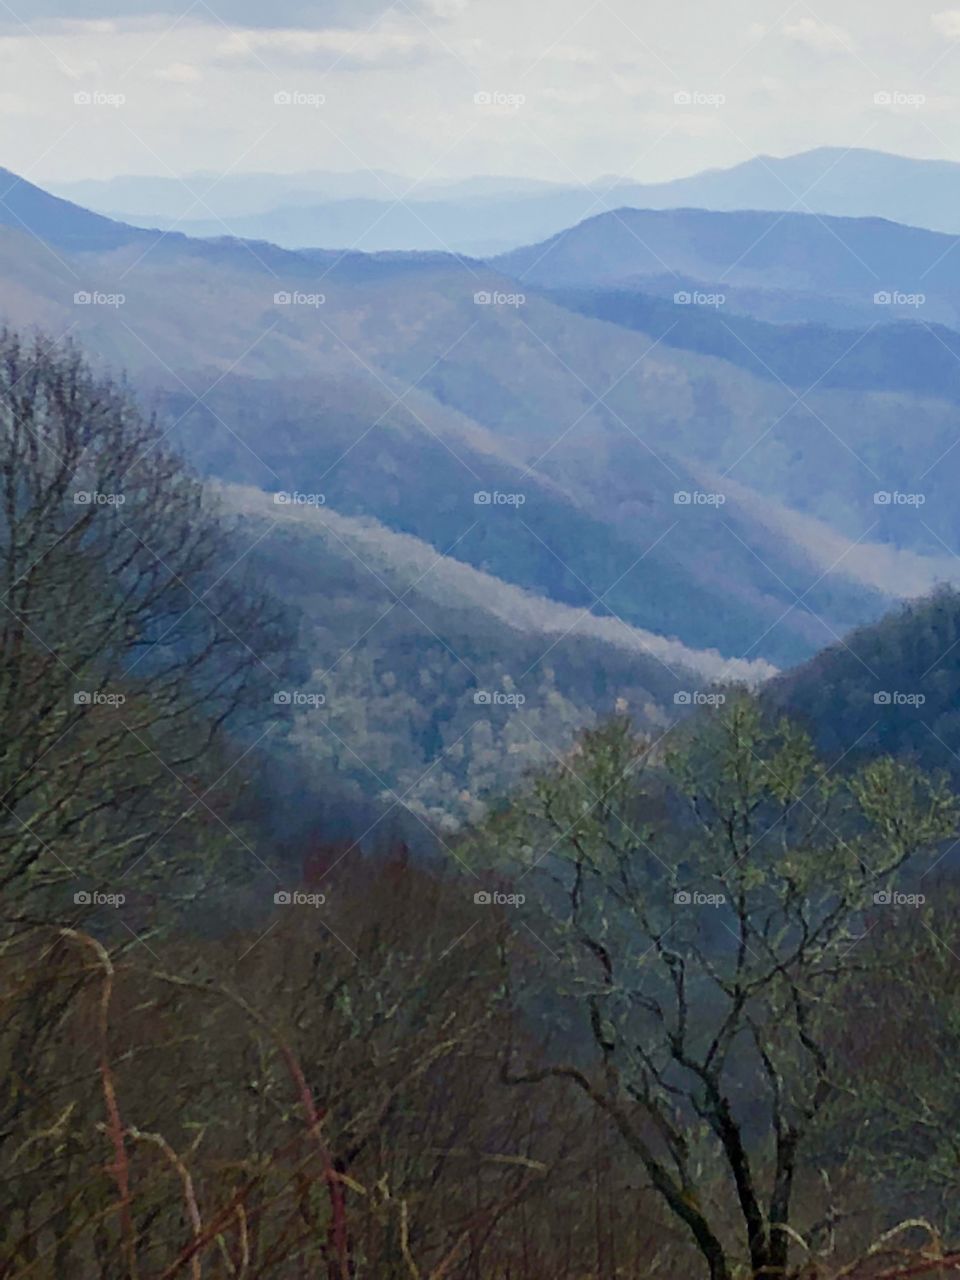 The beautiful Smokey Mountains with the different layers and hues of blue. 